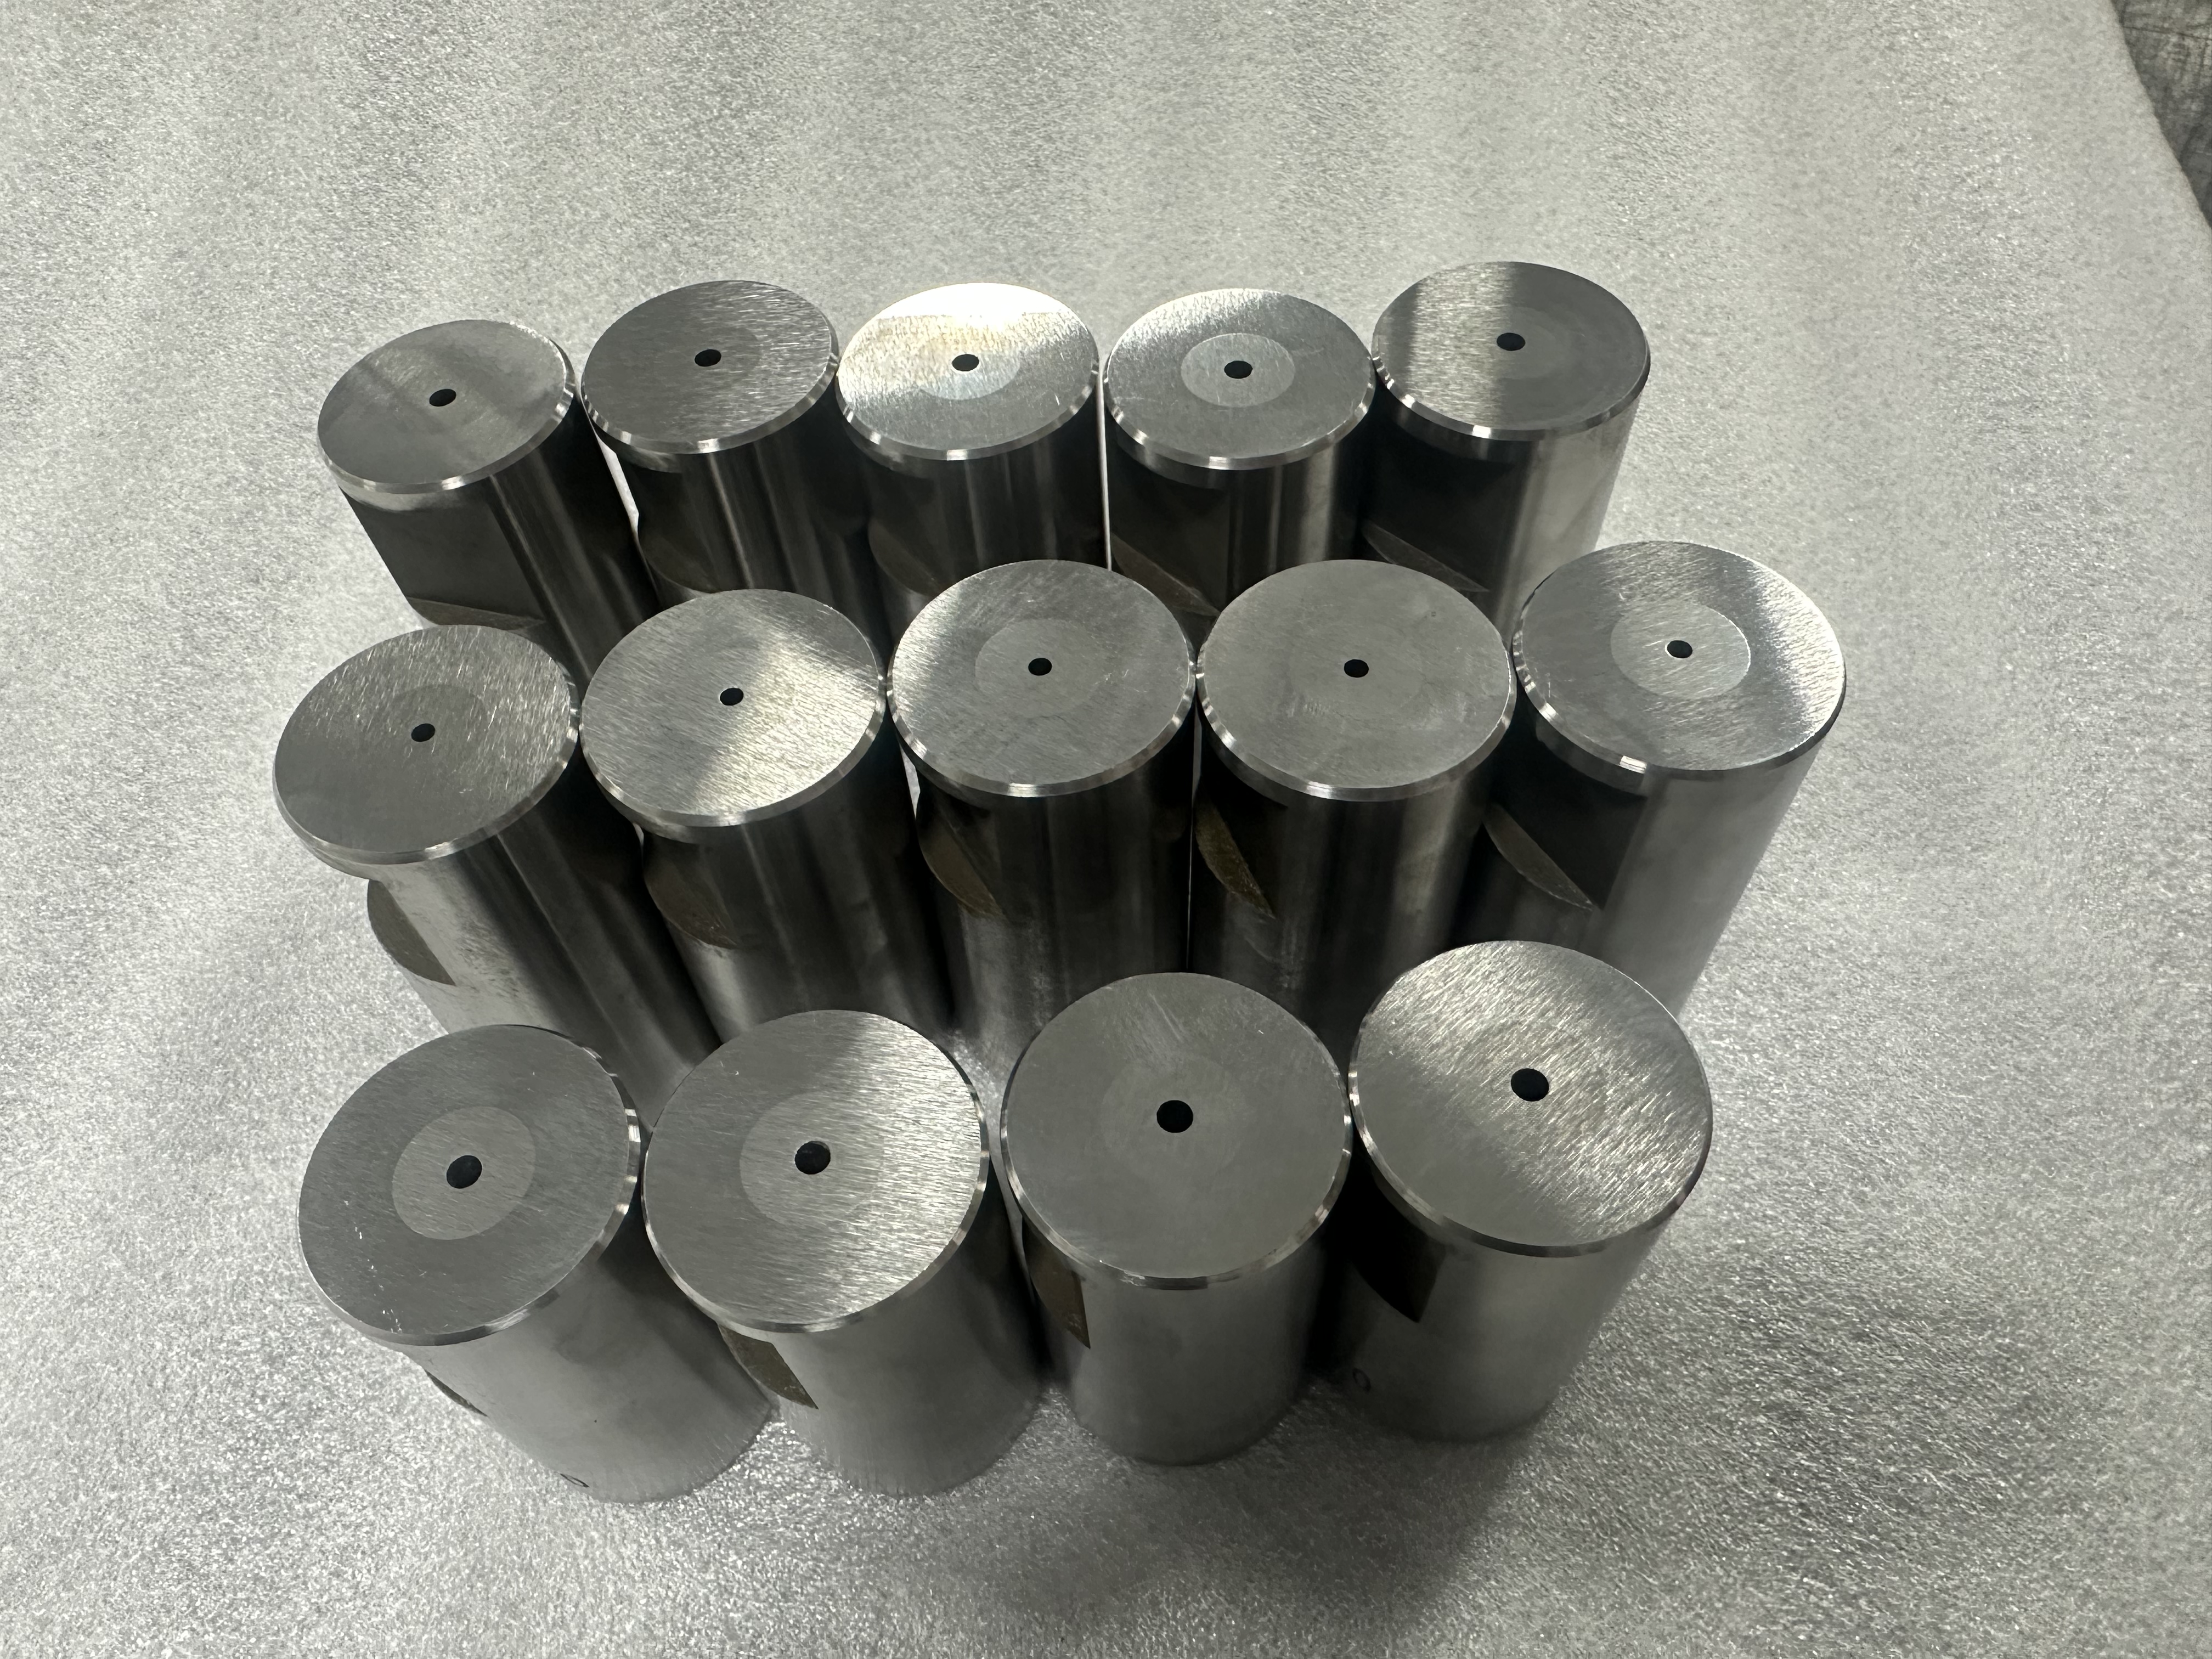 The role of tungsten carbide molds in nail production